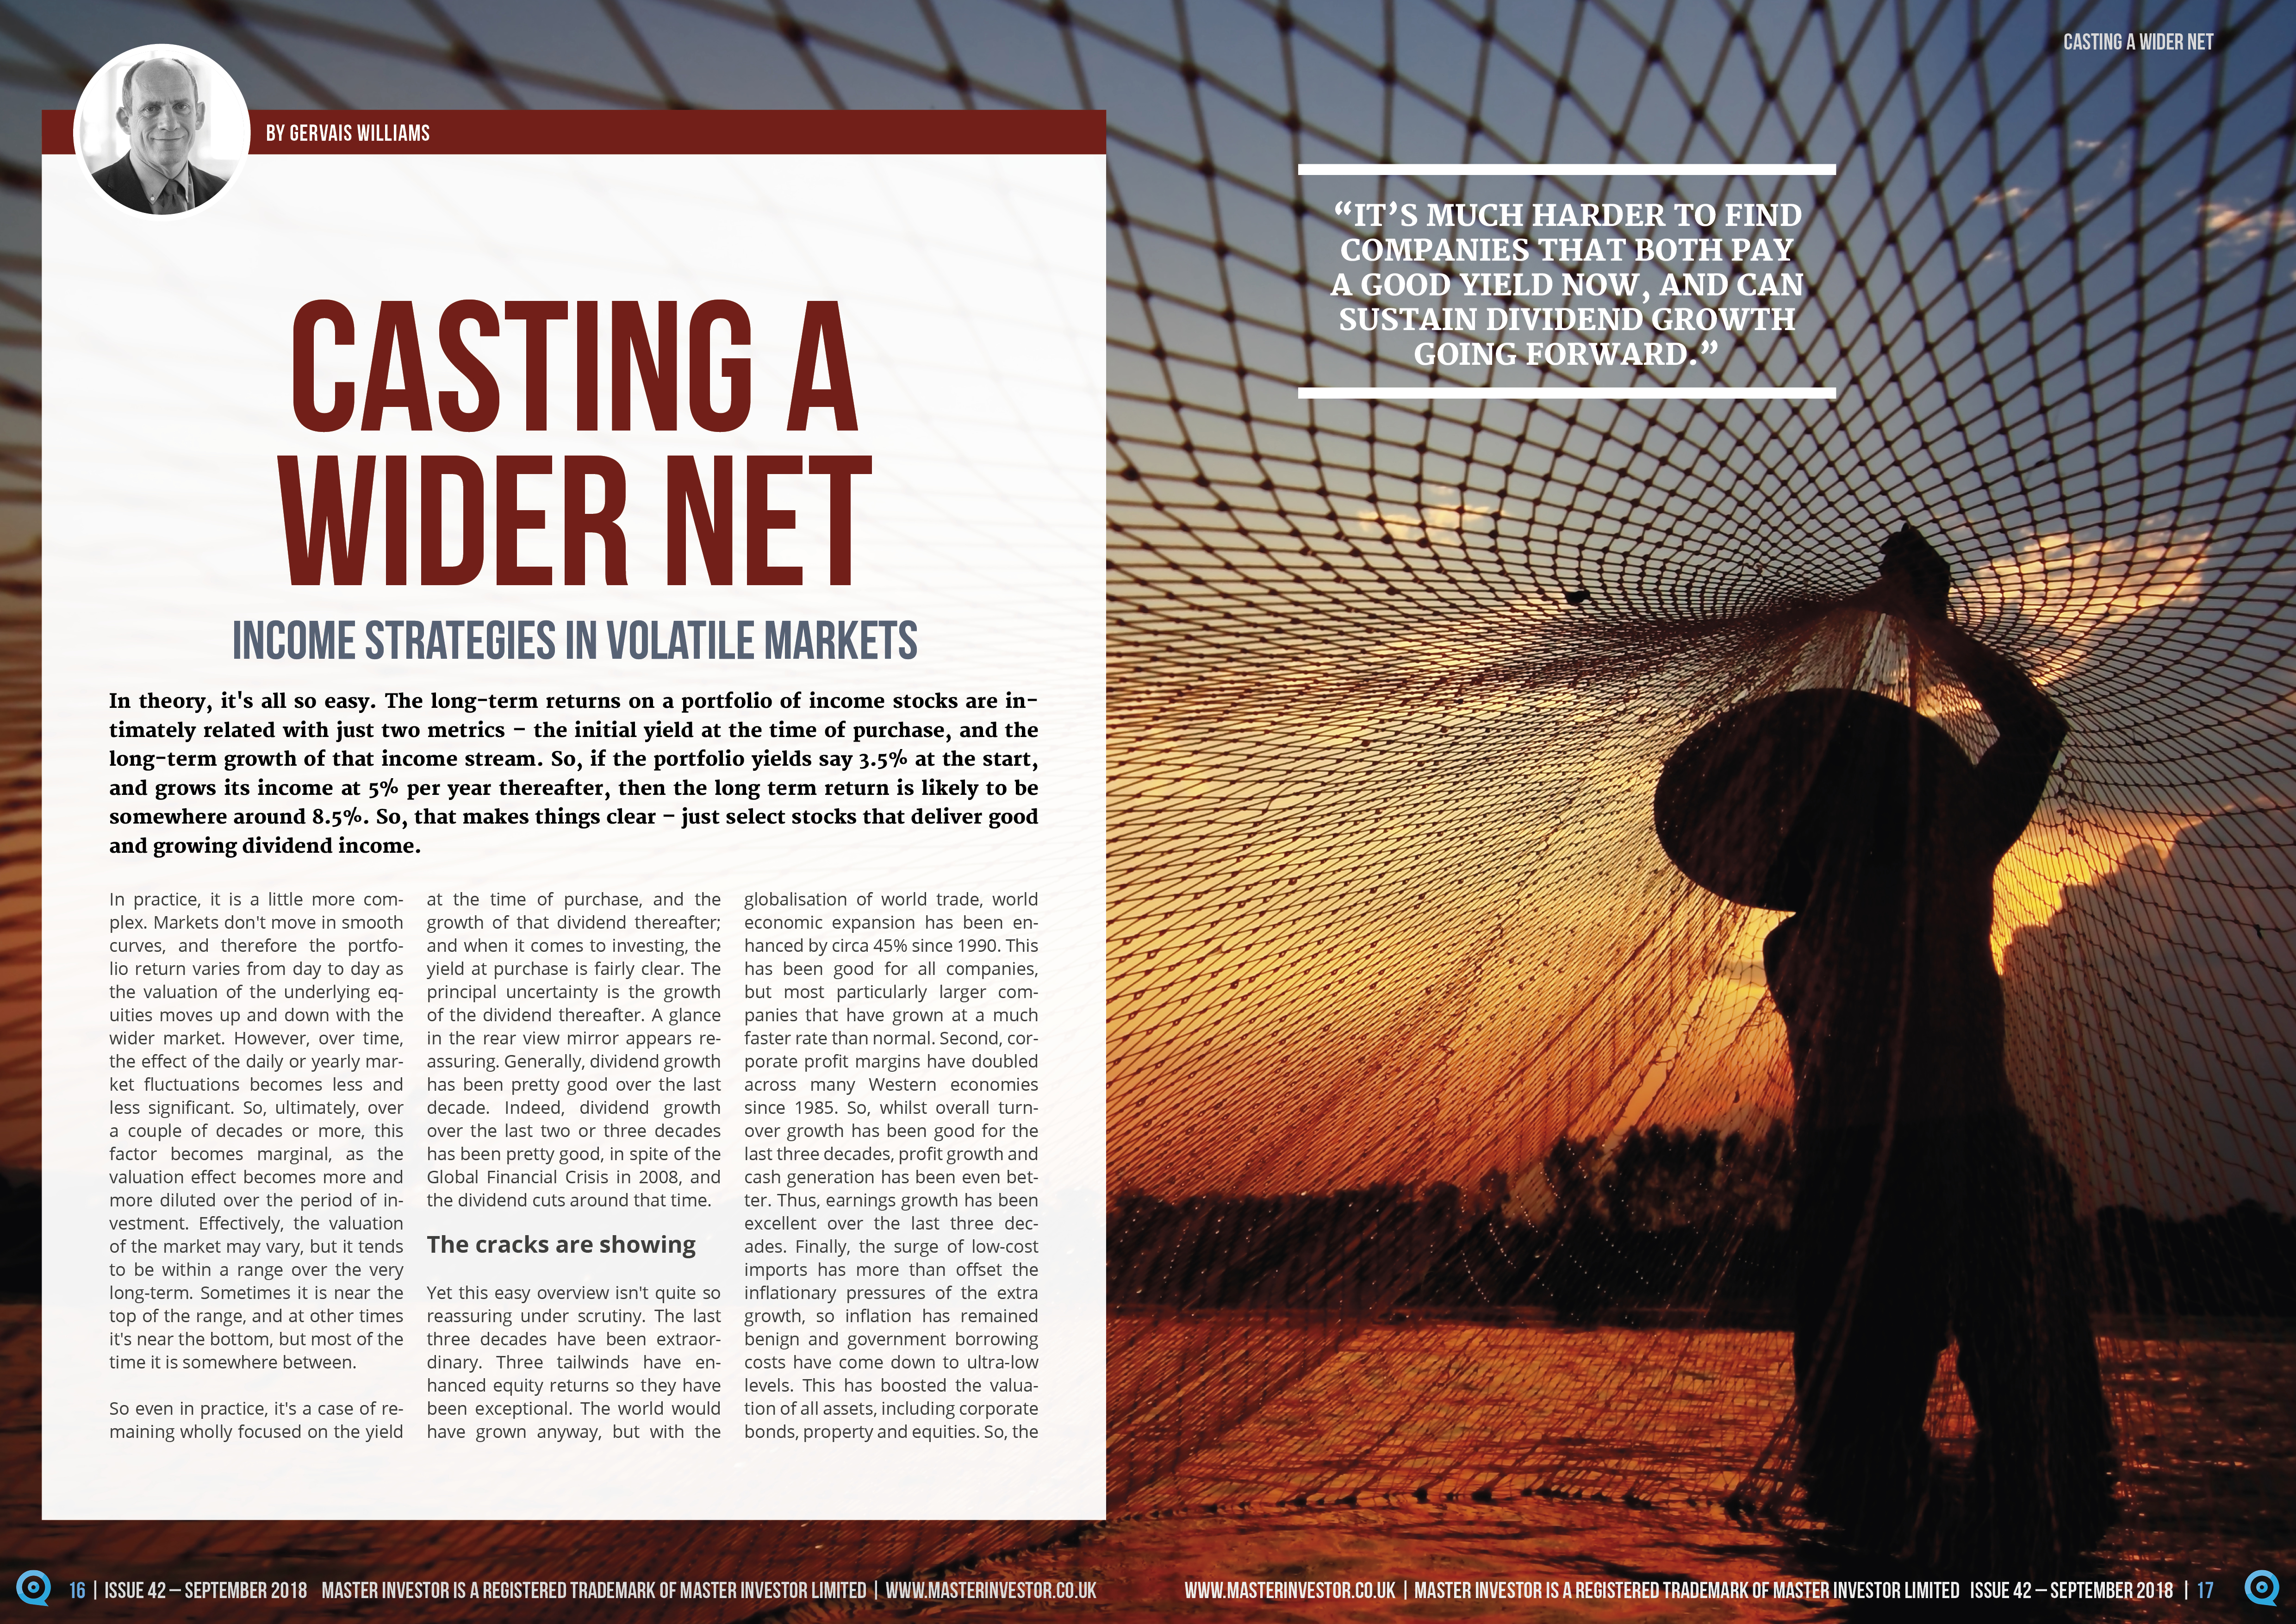 Casting a wider net: Income strategies in volatile markets